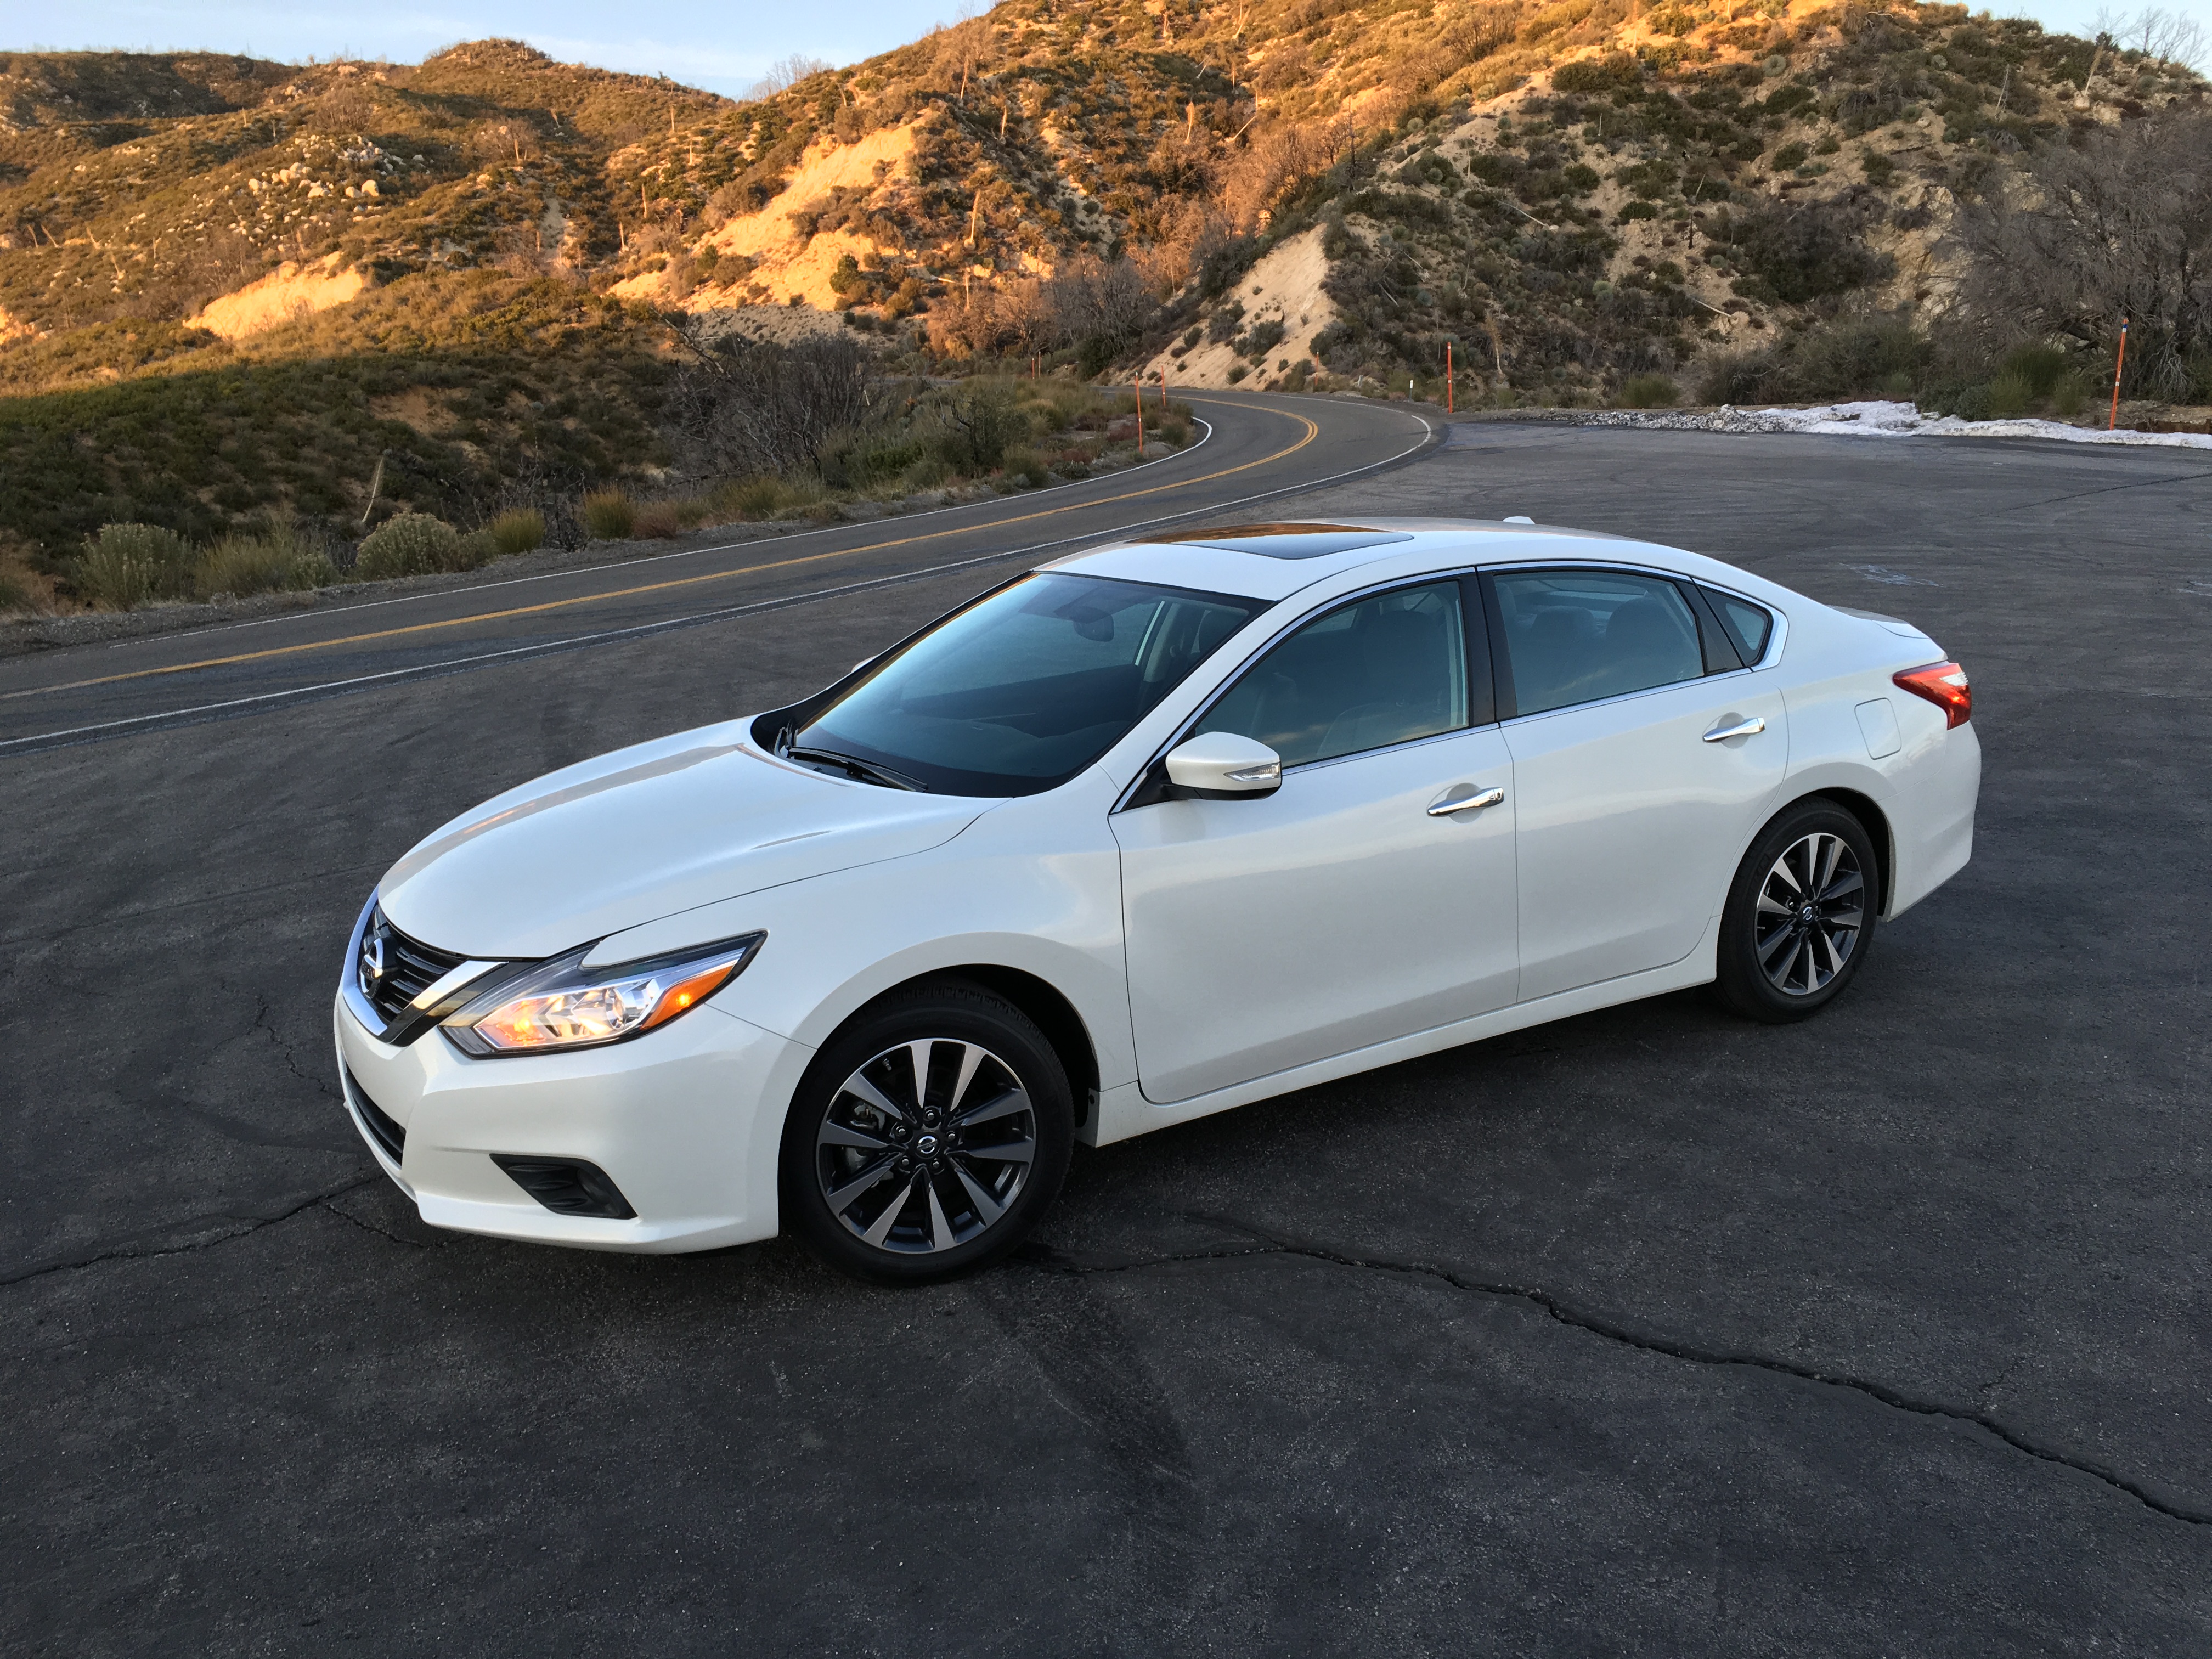 2016 Nissan Altima SL Review US quick drive CarAdvice